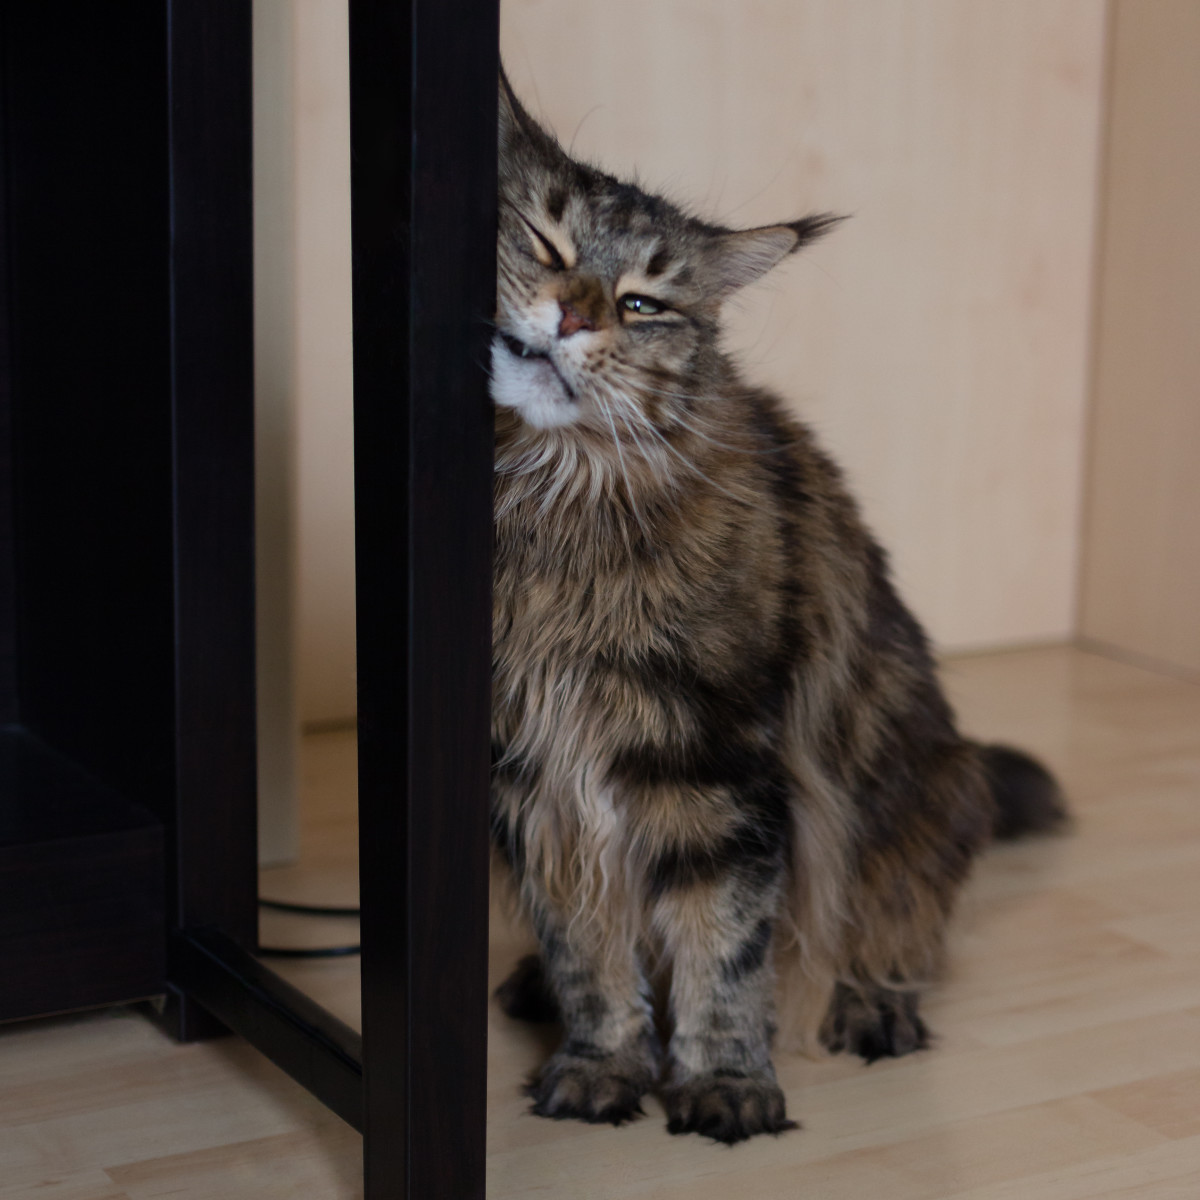 Cats in heat will rub up against everything in sight, including doors, walls, furniture, and you!